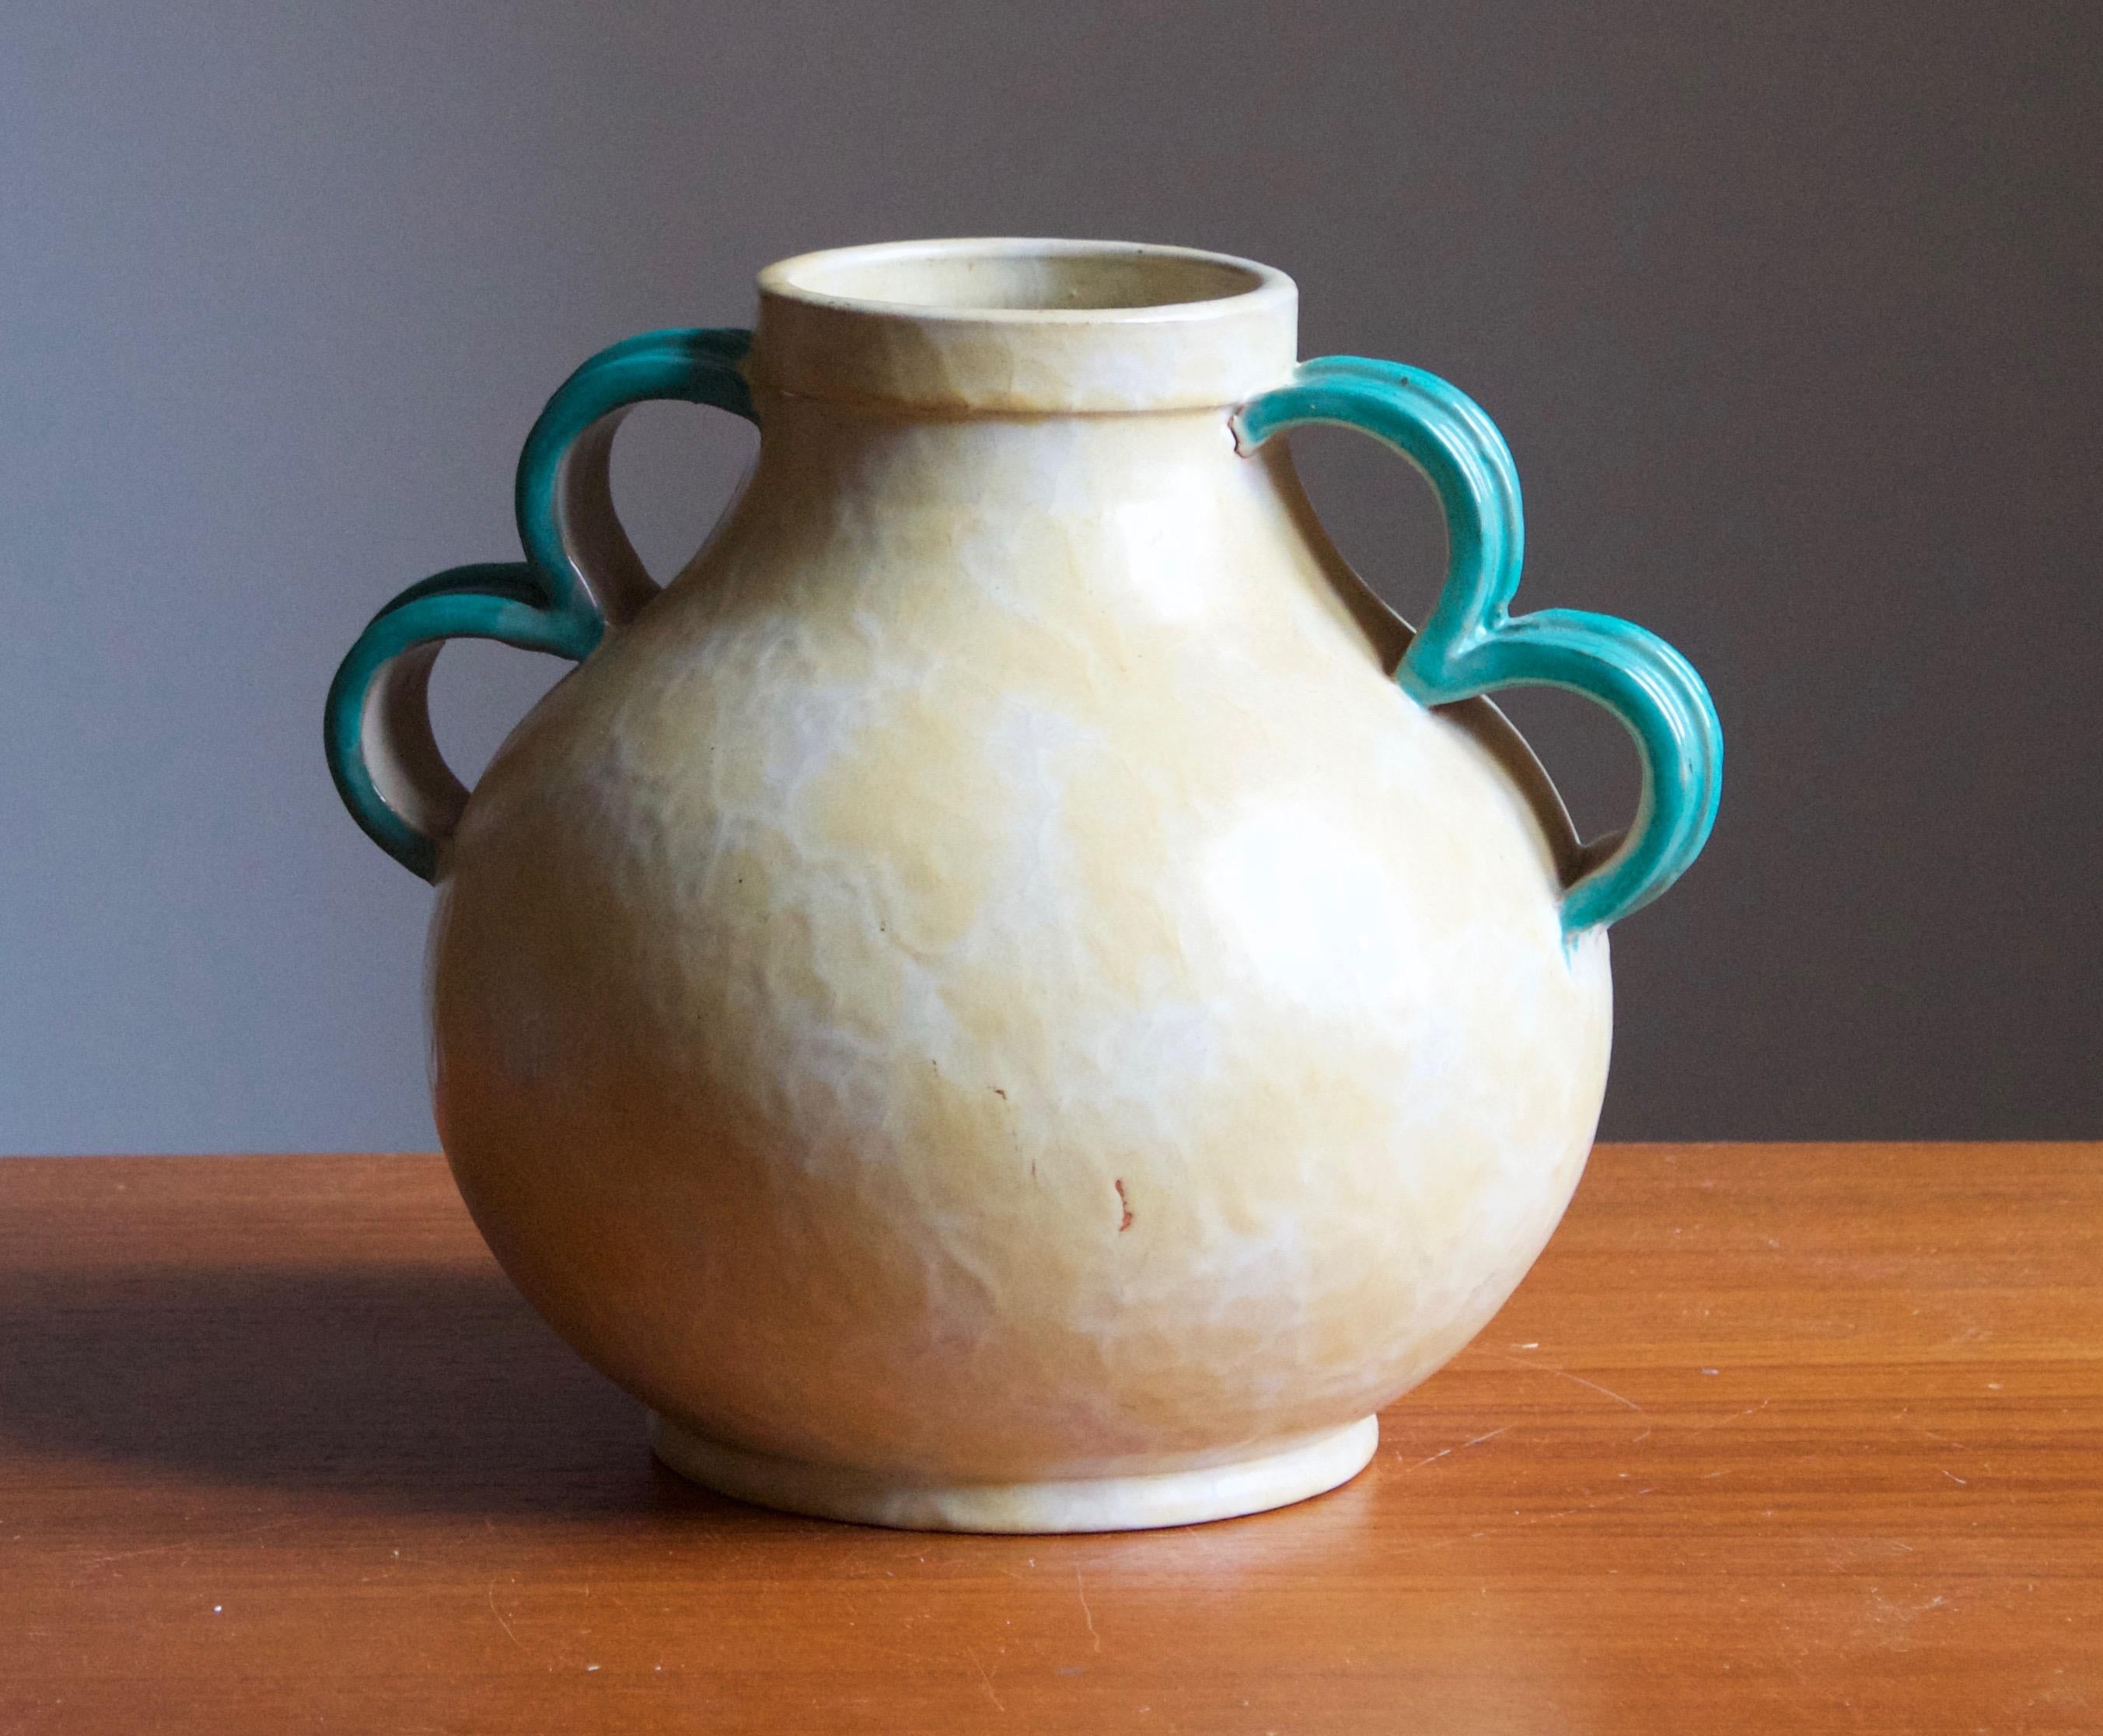 A large early modernist vase. Produced by Upsala-Ekeby, Sweden, 1930s.

Other designers of the period include Ettore Sottsass, Carl Harry Stålhane, Lisa Larsson, Axel Salto, and Arne Bang.